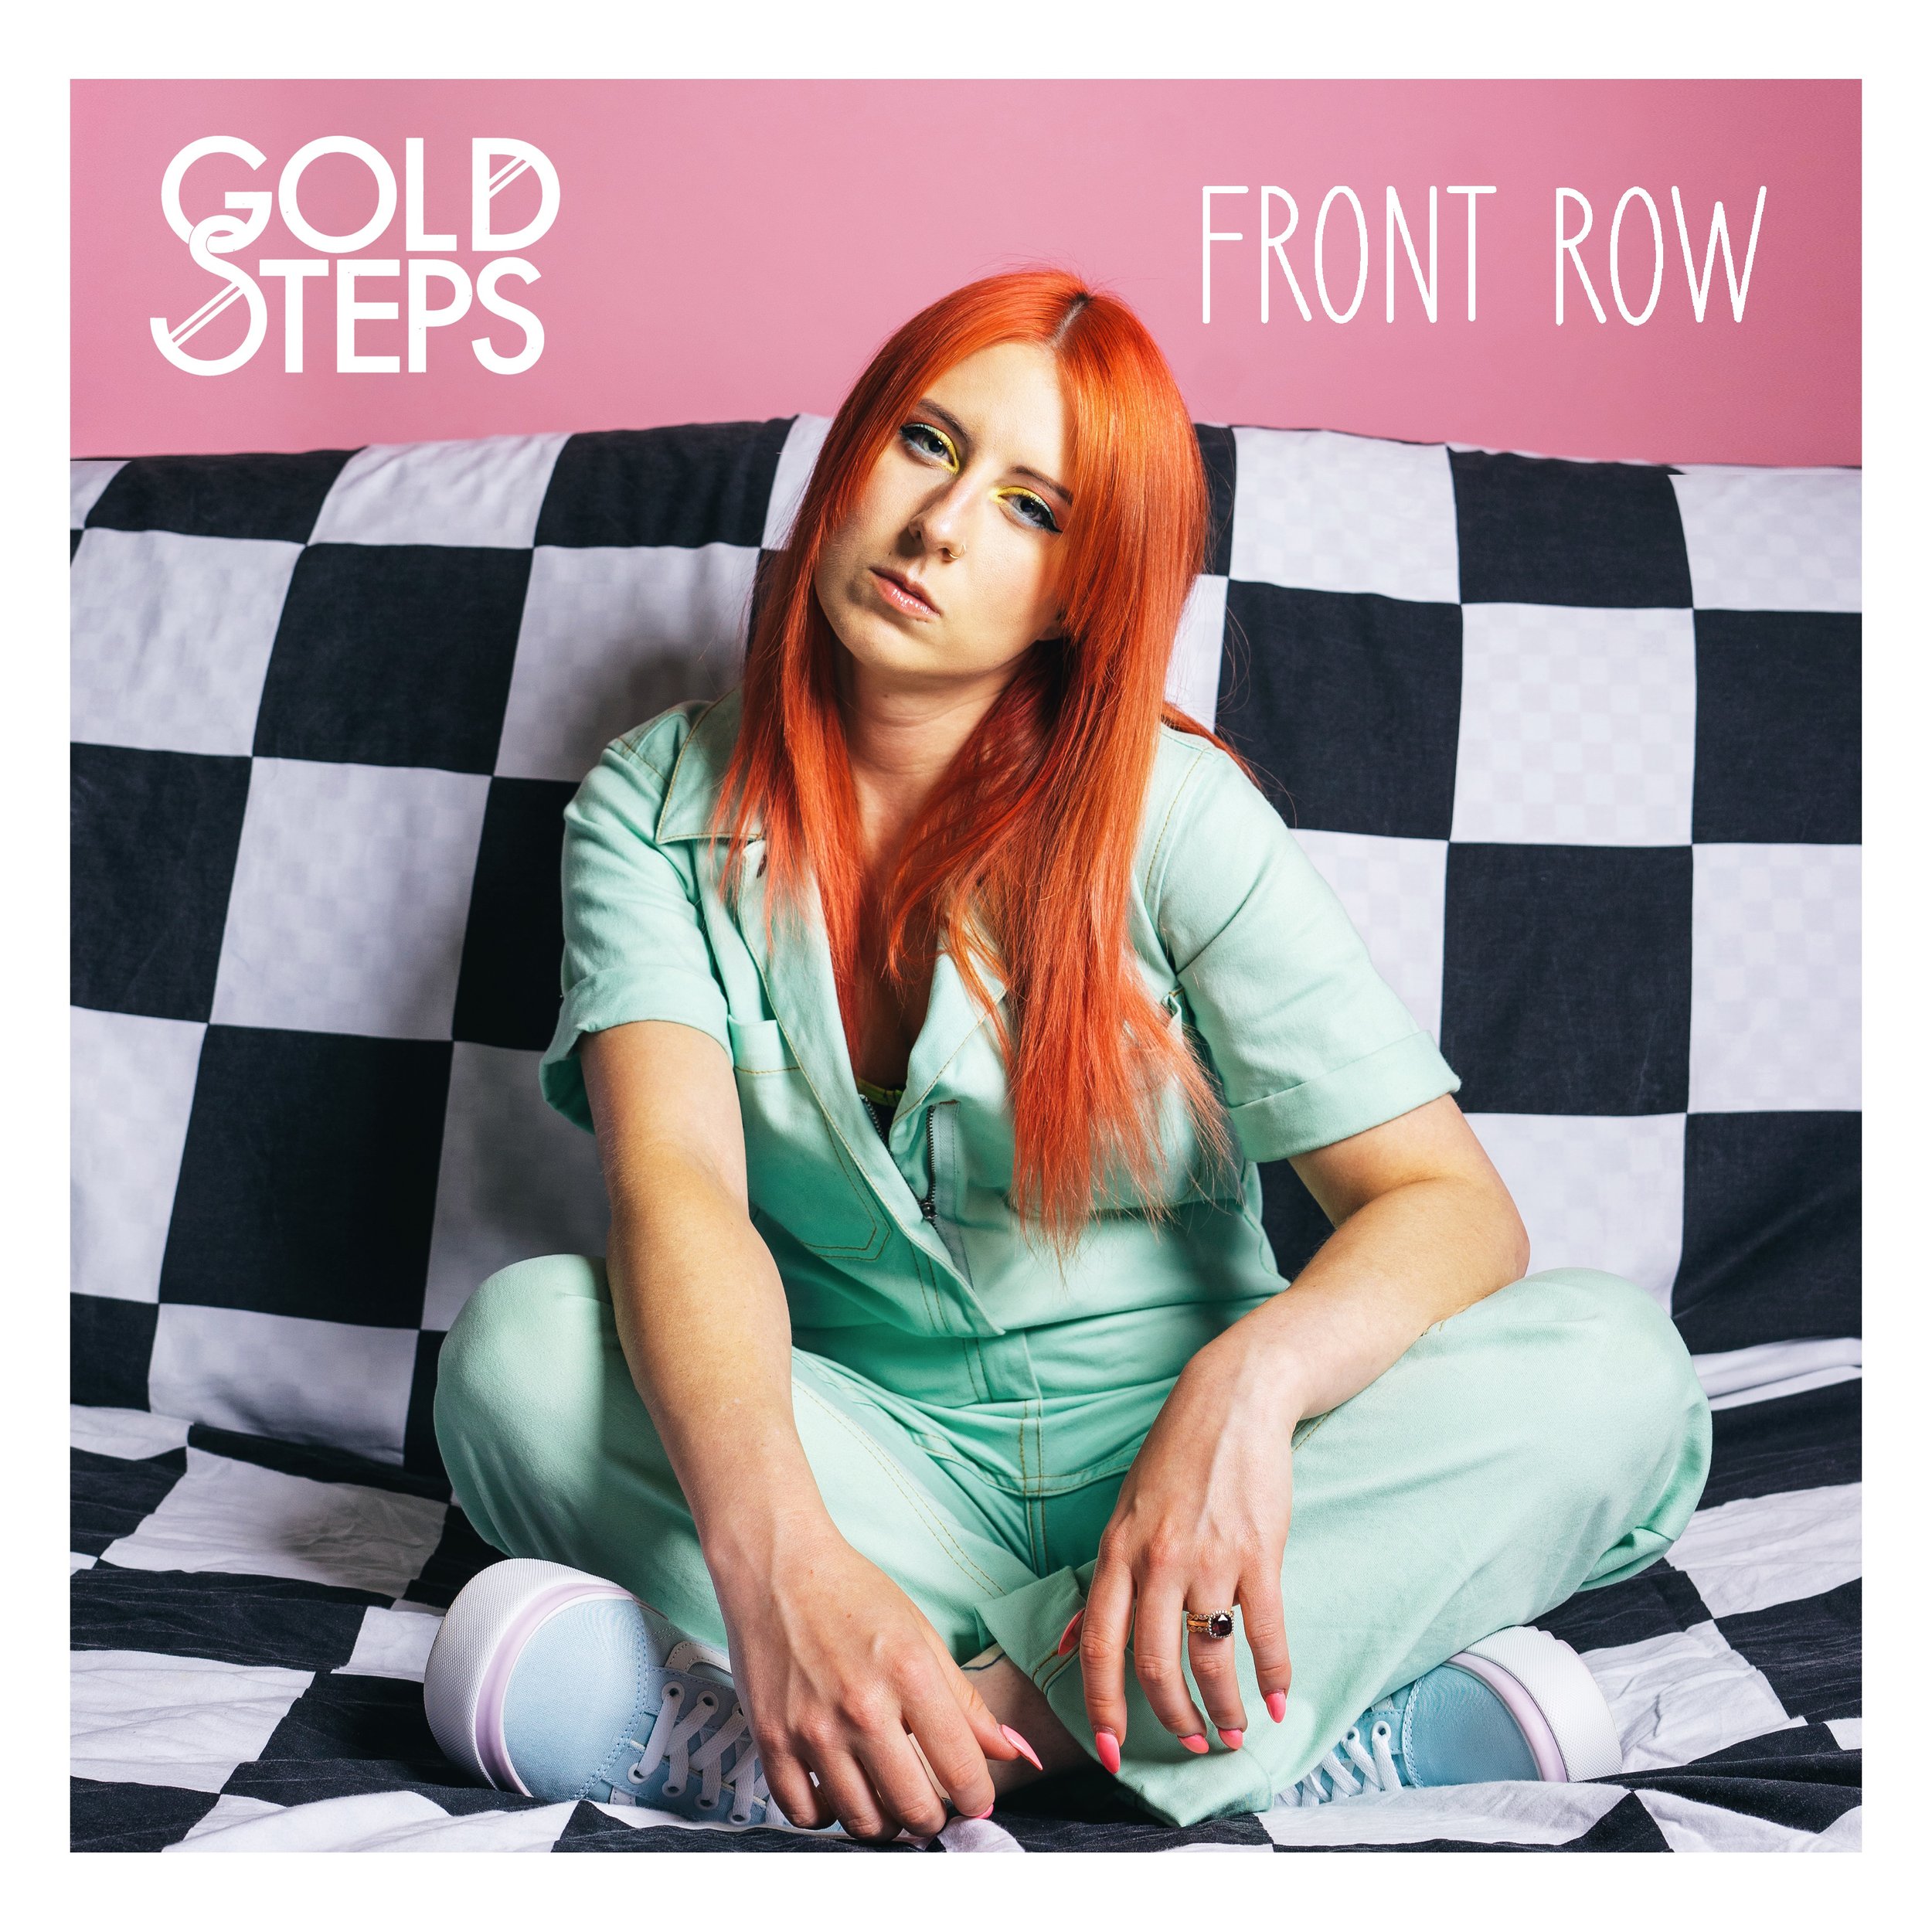 Gold Steps - "Front Row"